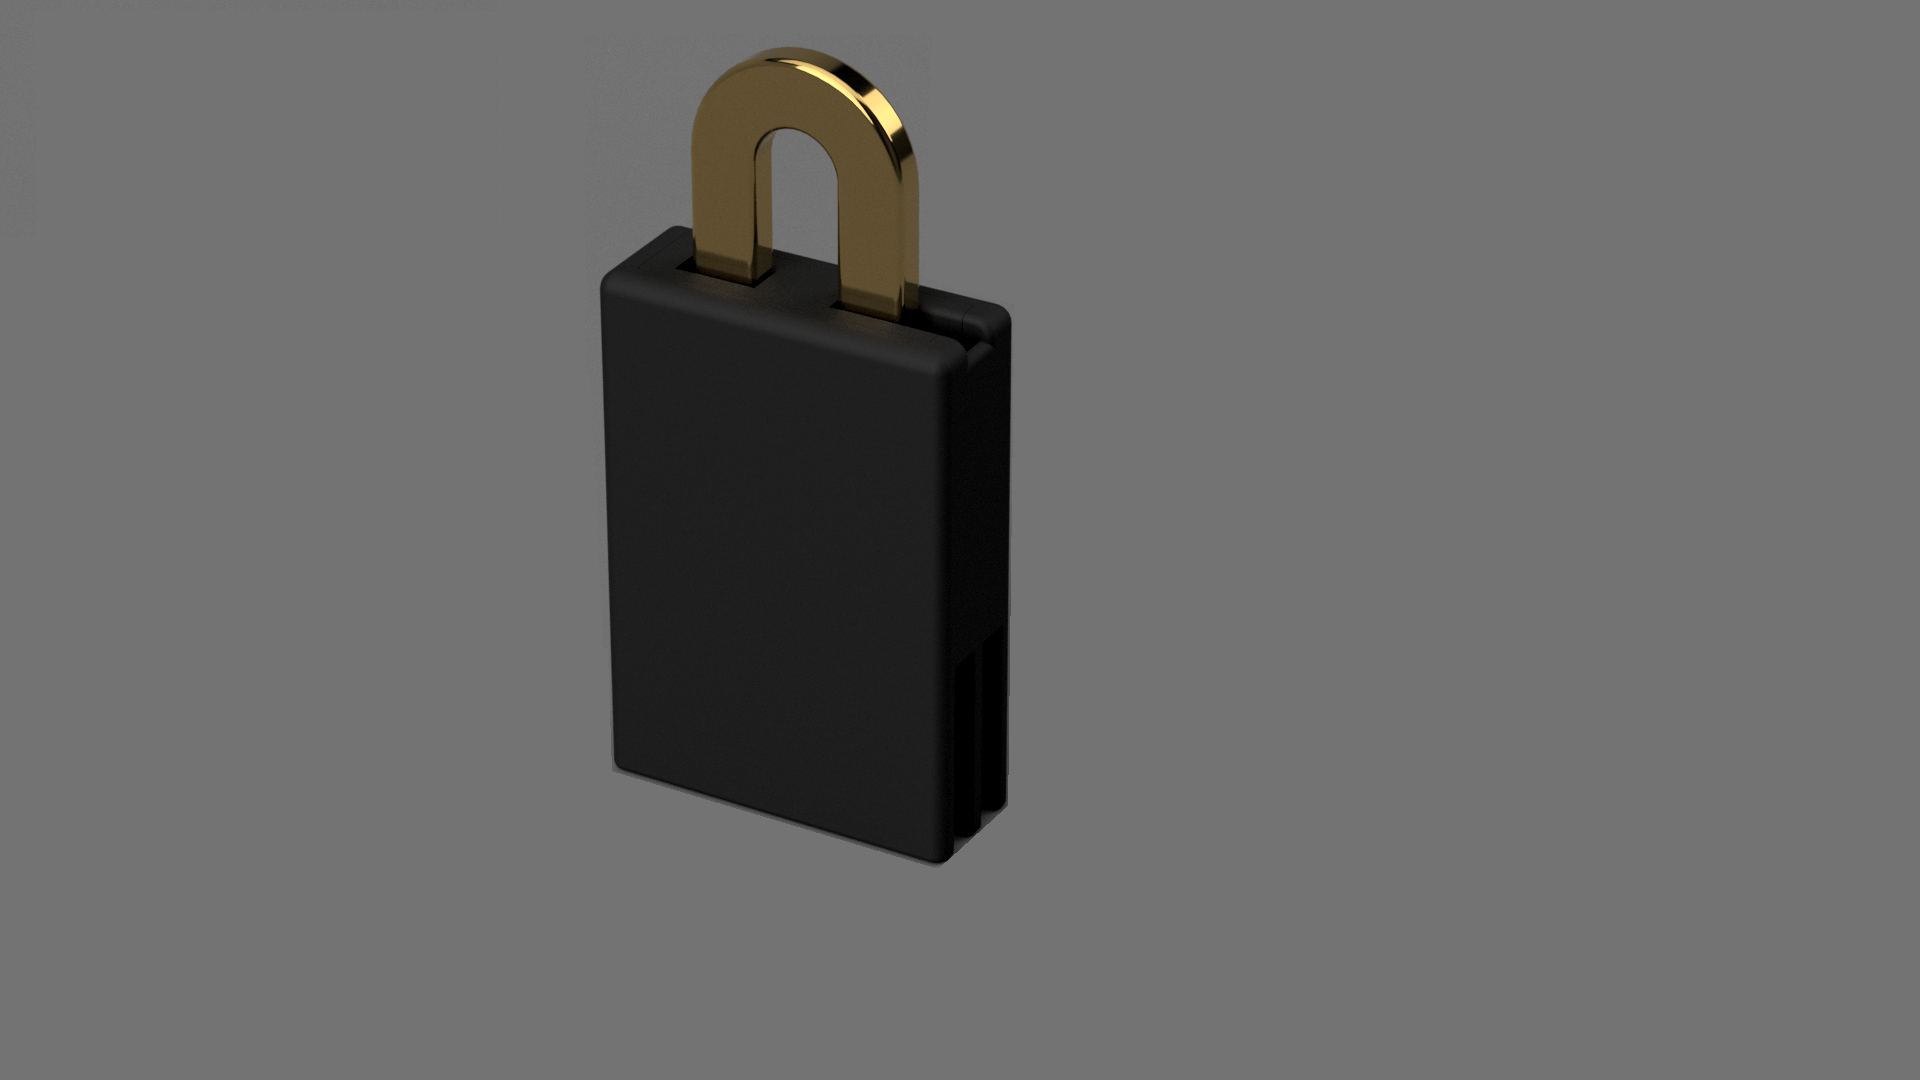 3D Printed The Puzzle Lockevolvingextrusions | Pinshape - 3D Printable Lock Puzzle